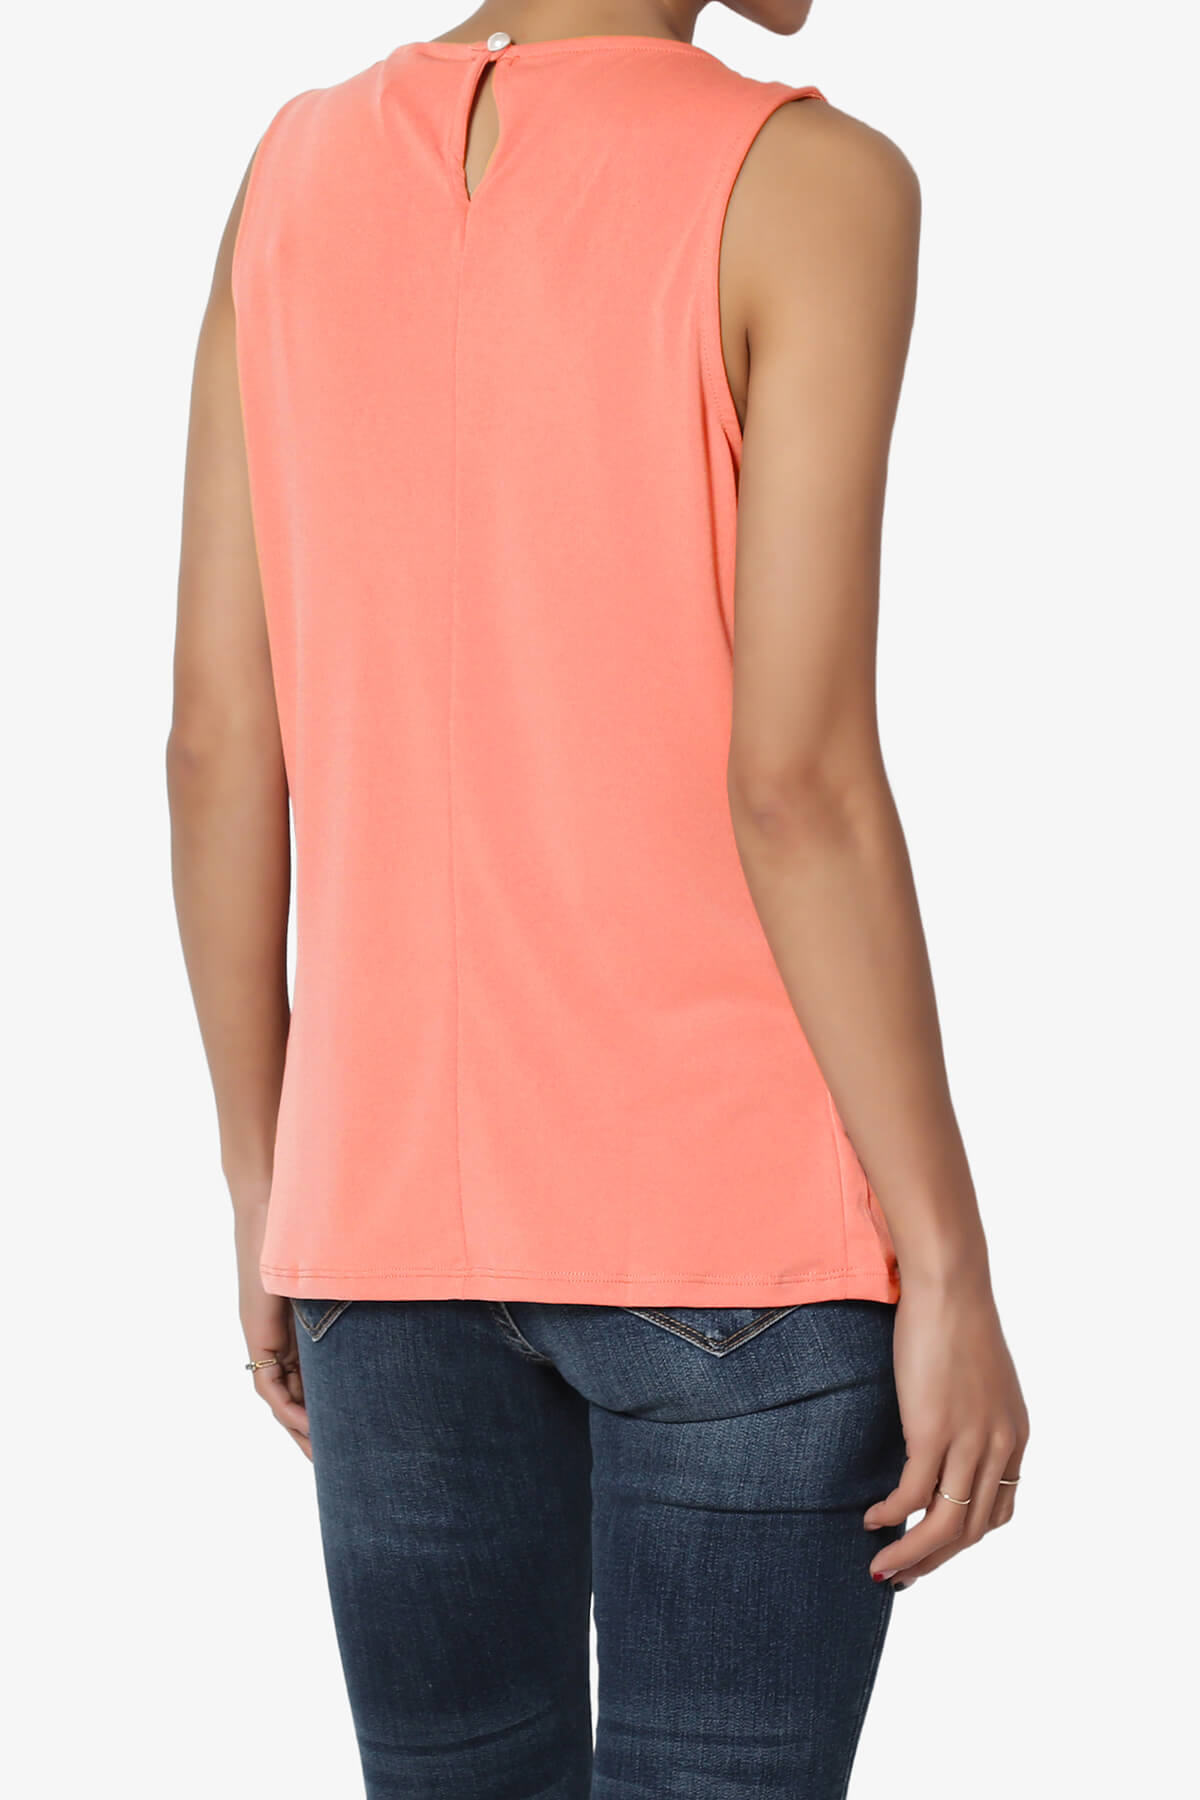 Load image into Gallery viewer, Chaffee Pleat Neck Tank Top CORAL_4
